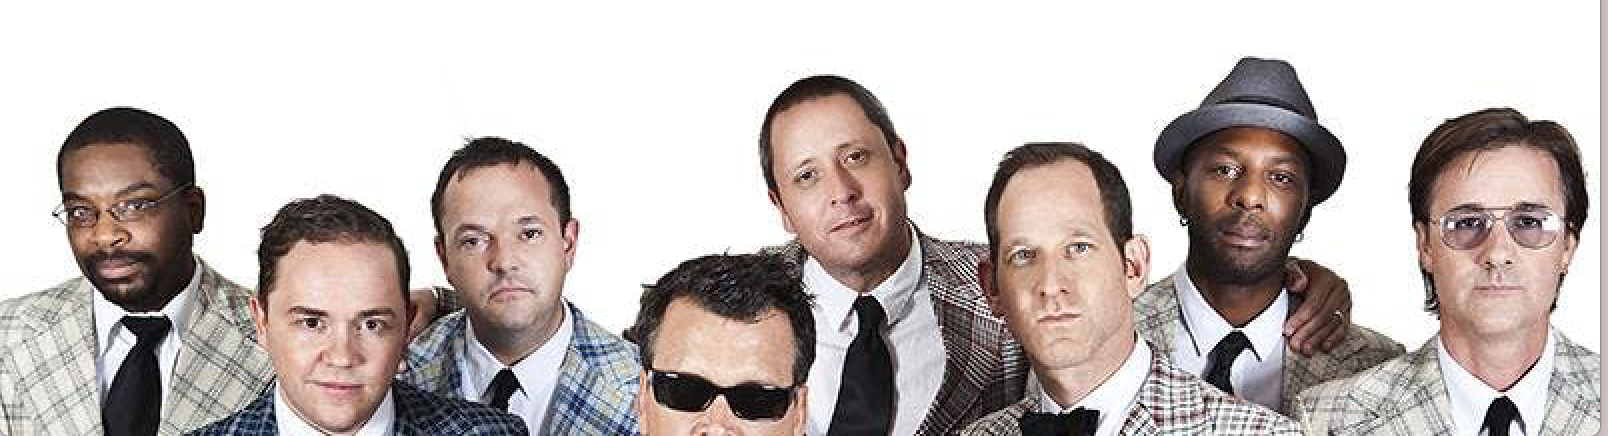 A photo of the Mighty Mighty Bosstones.